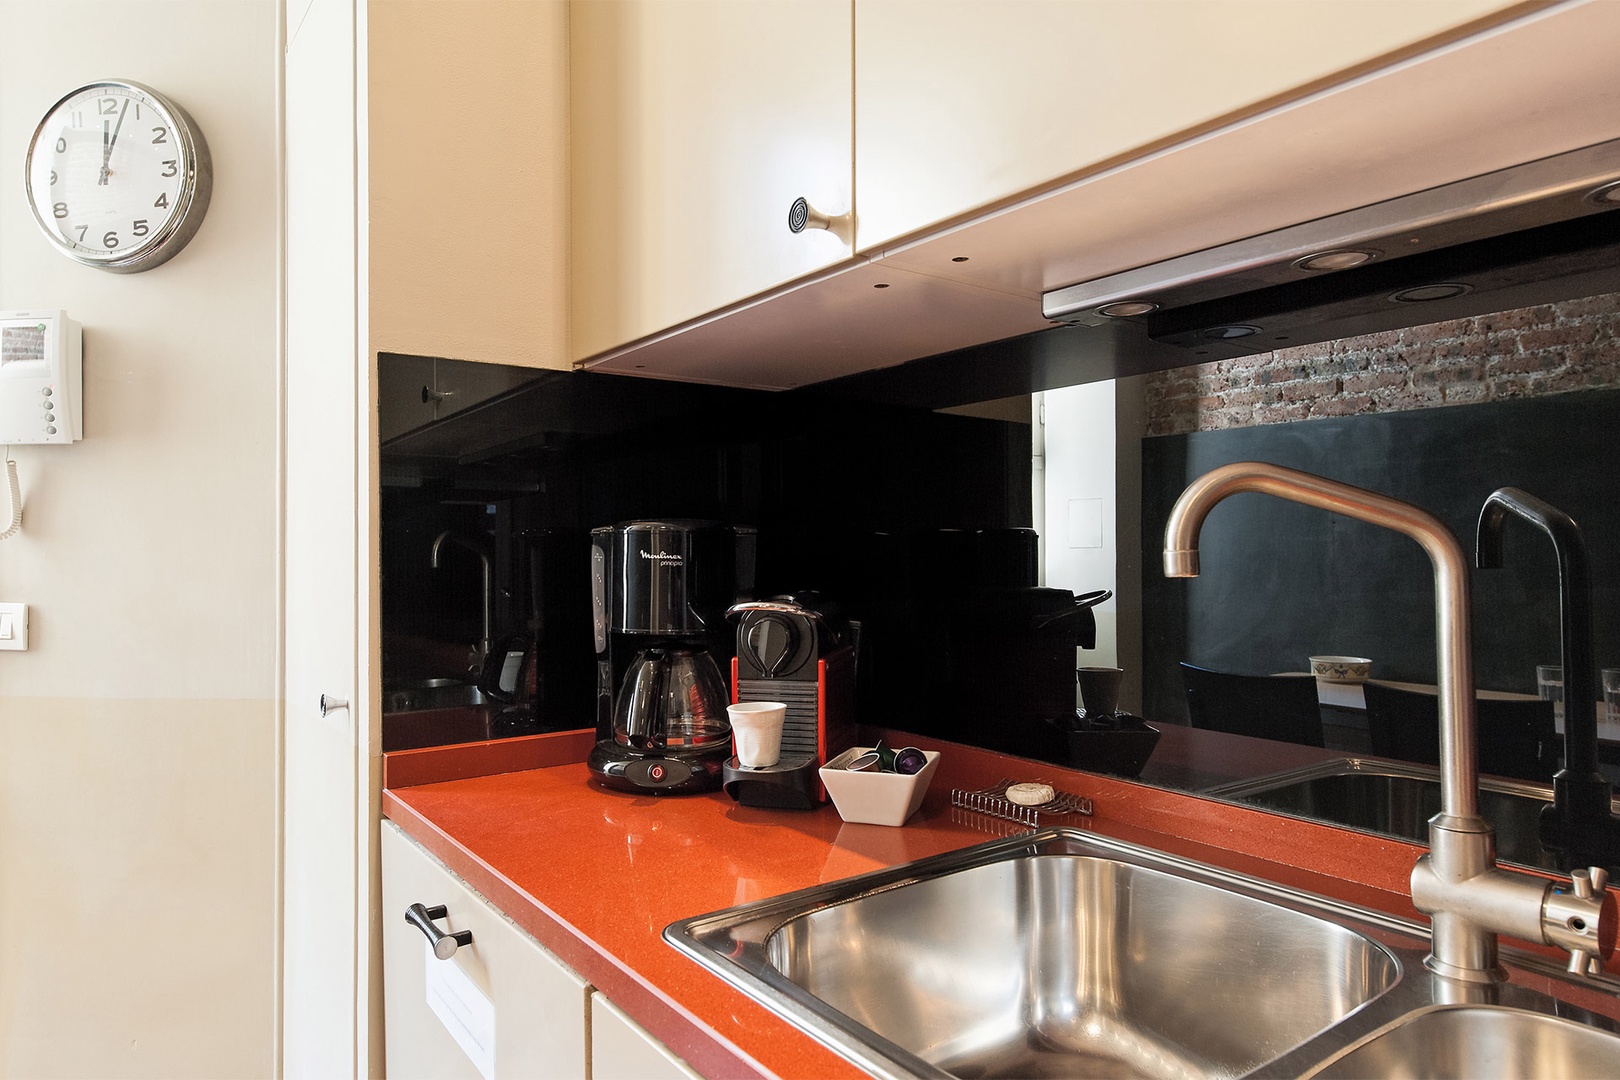 Guests love having a dishwasher and Nespresso maker!